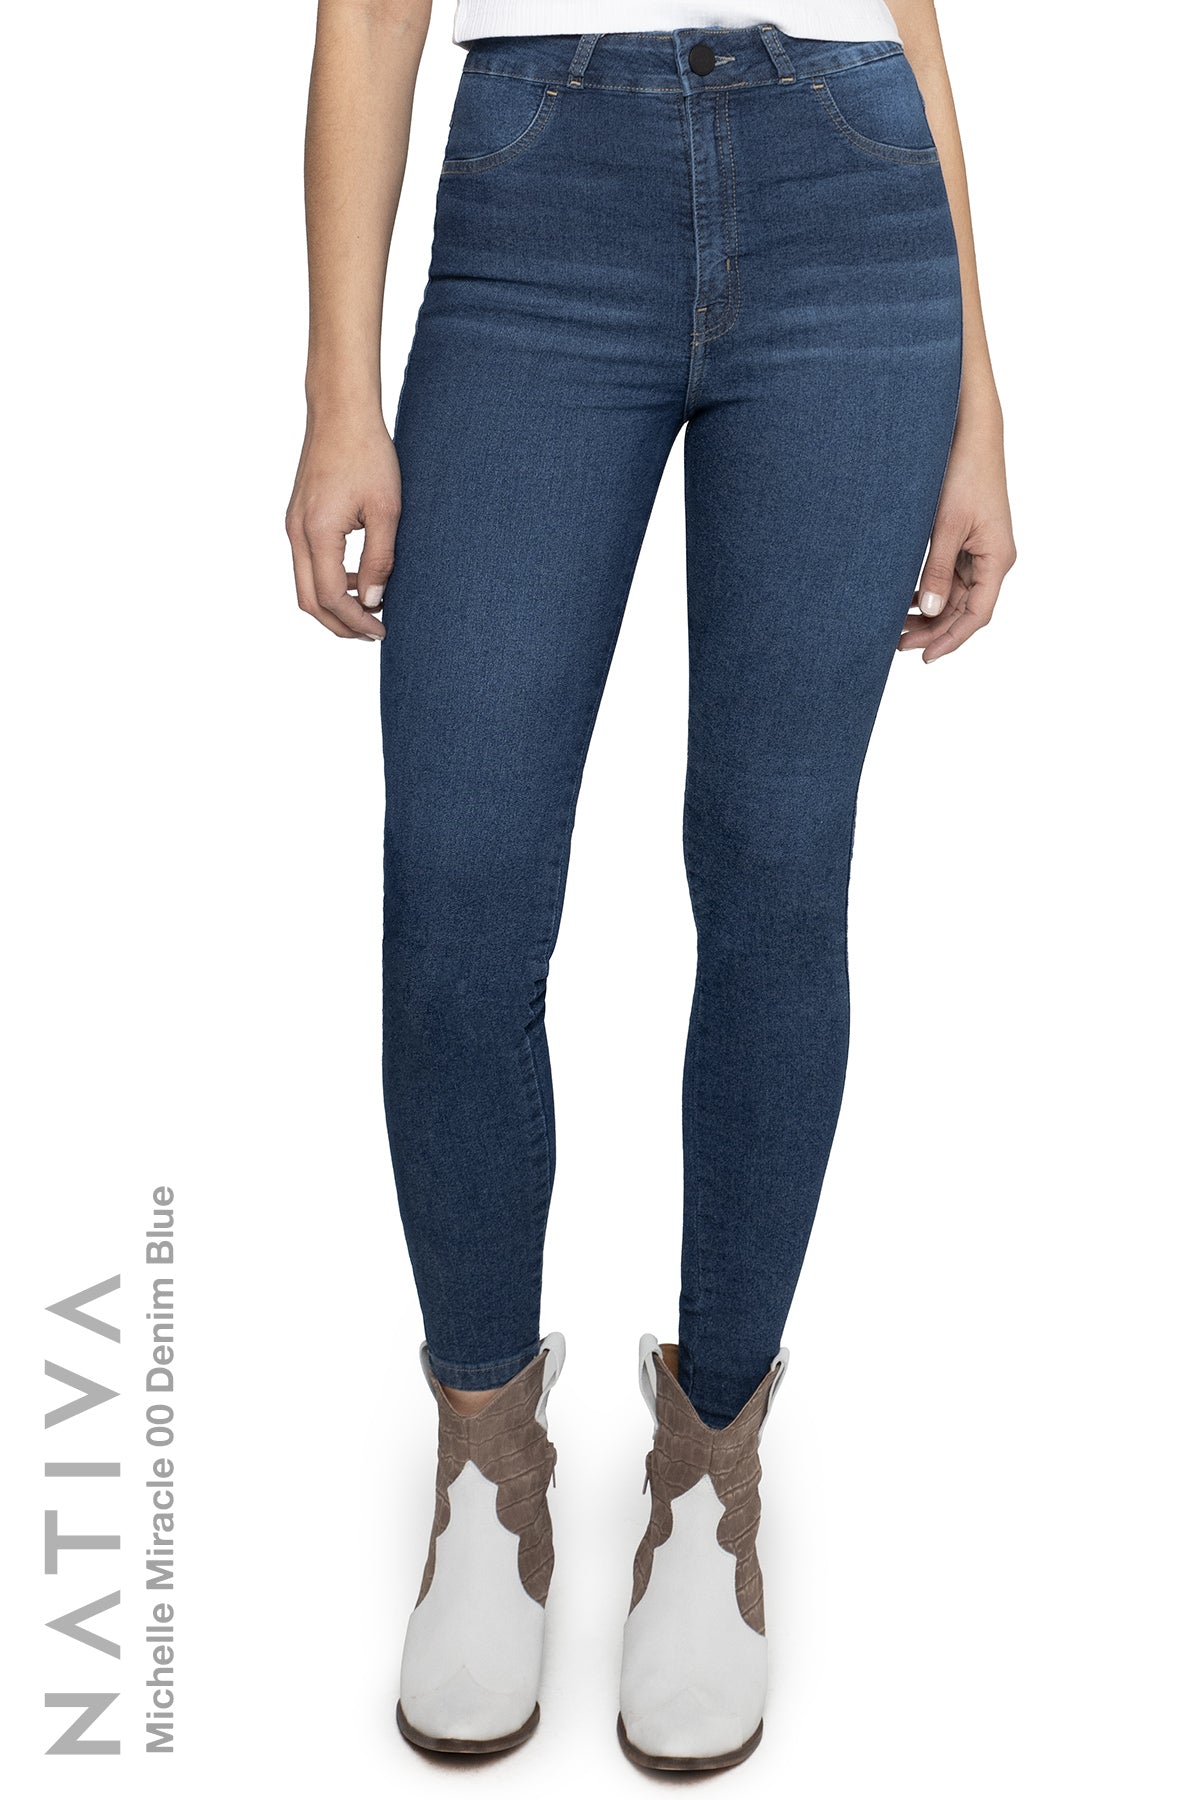 NATIVA, STRETCH JEANS. MICHELLE MIRACLE 00 DENIM BLUE, High Shaping Ca